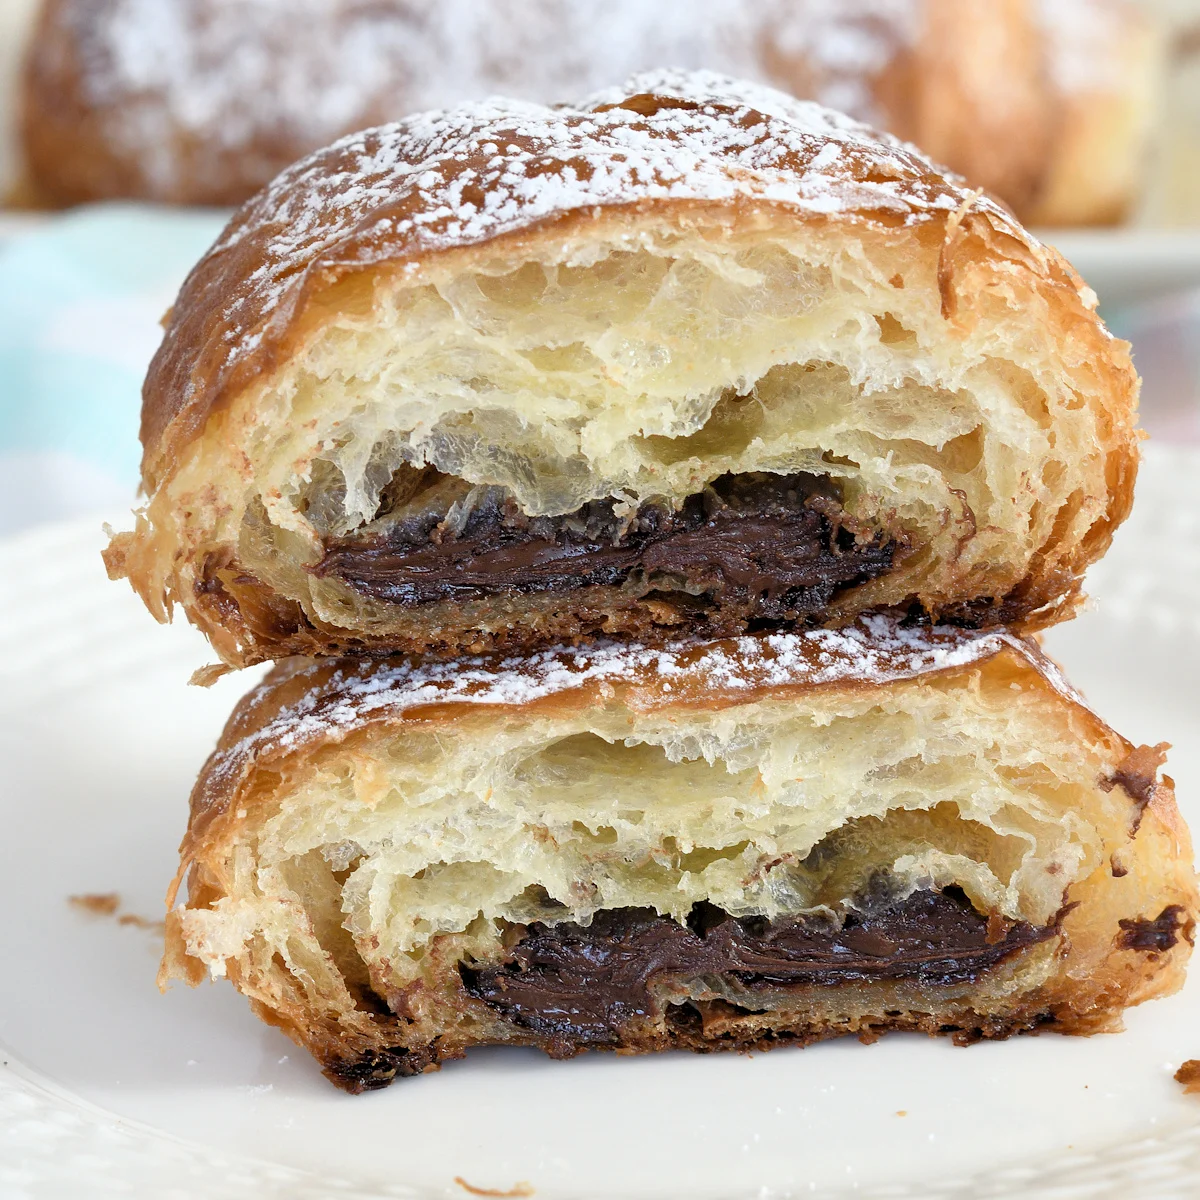 a chocolate croissant on a plate